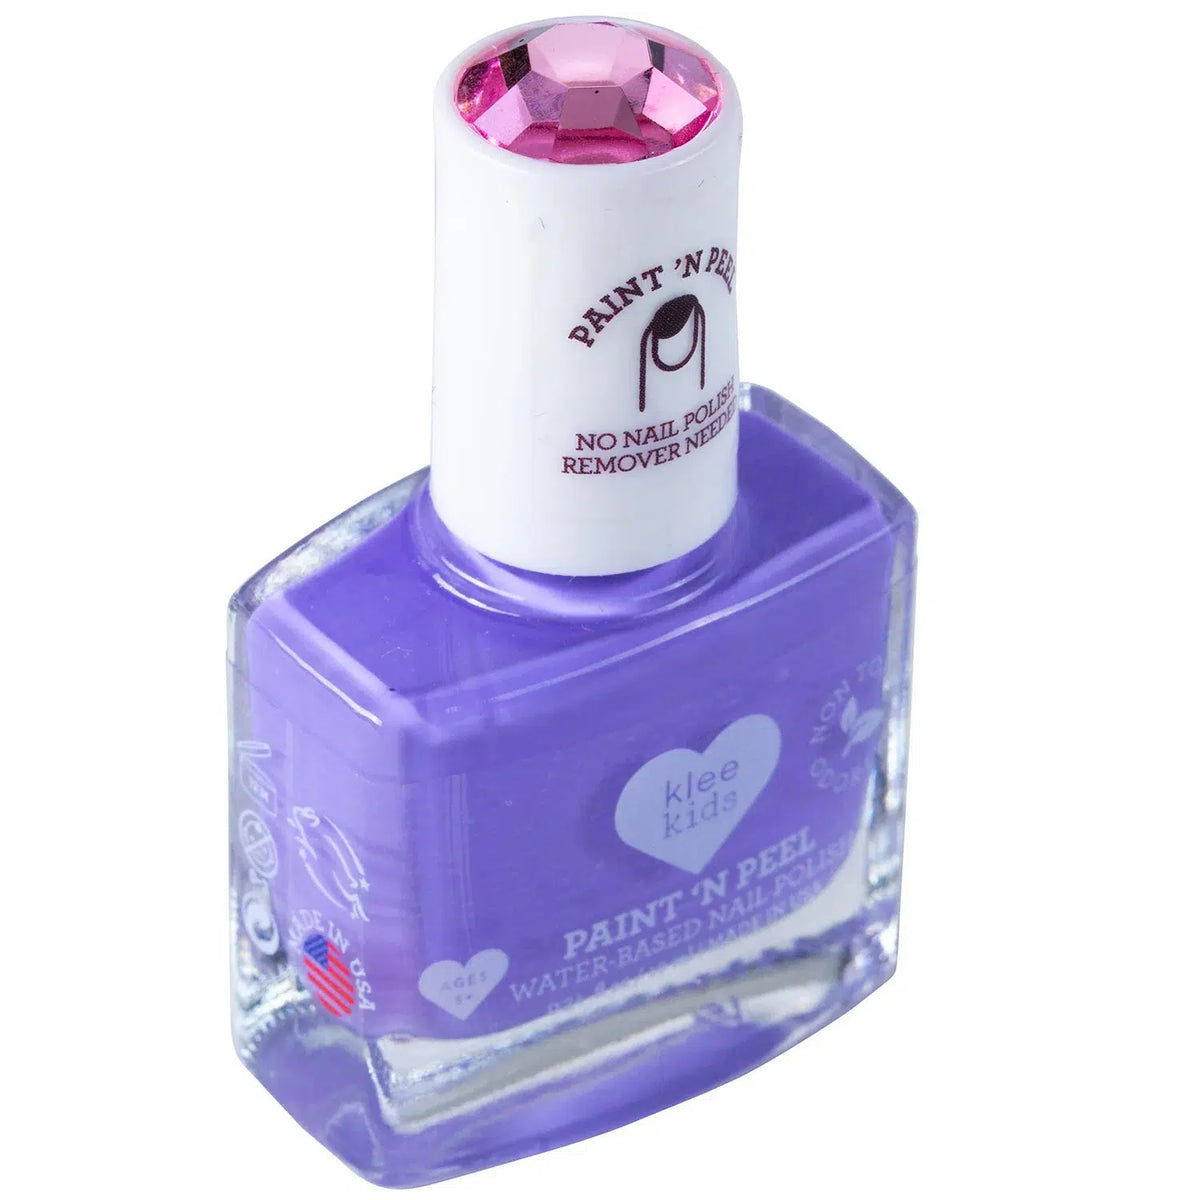 Front side view of Hartford - Klee Kids Water-Based Peelable Nail Polish.